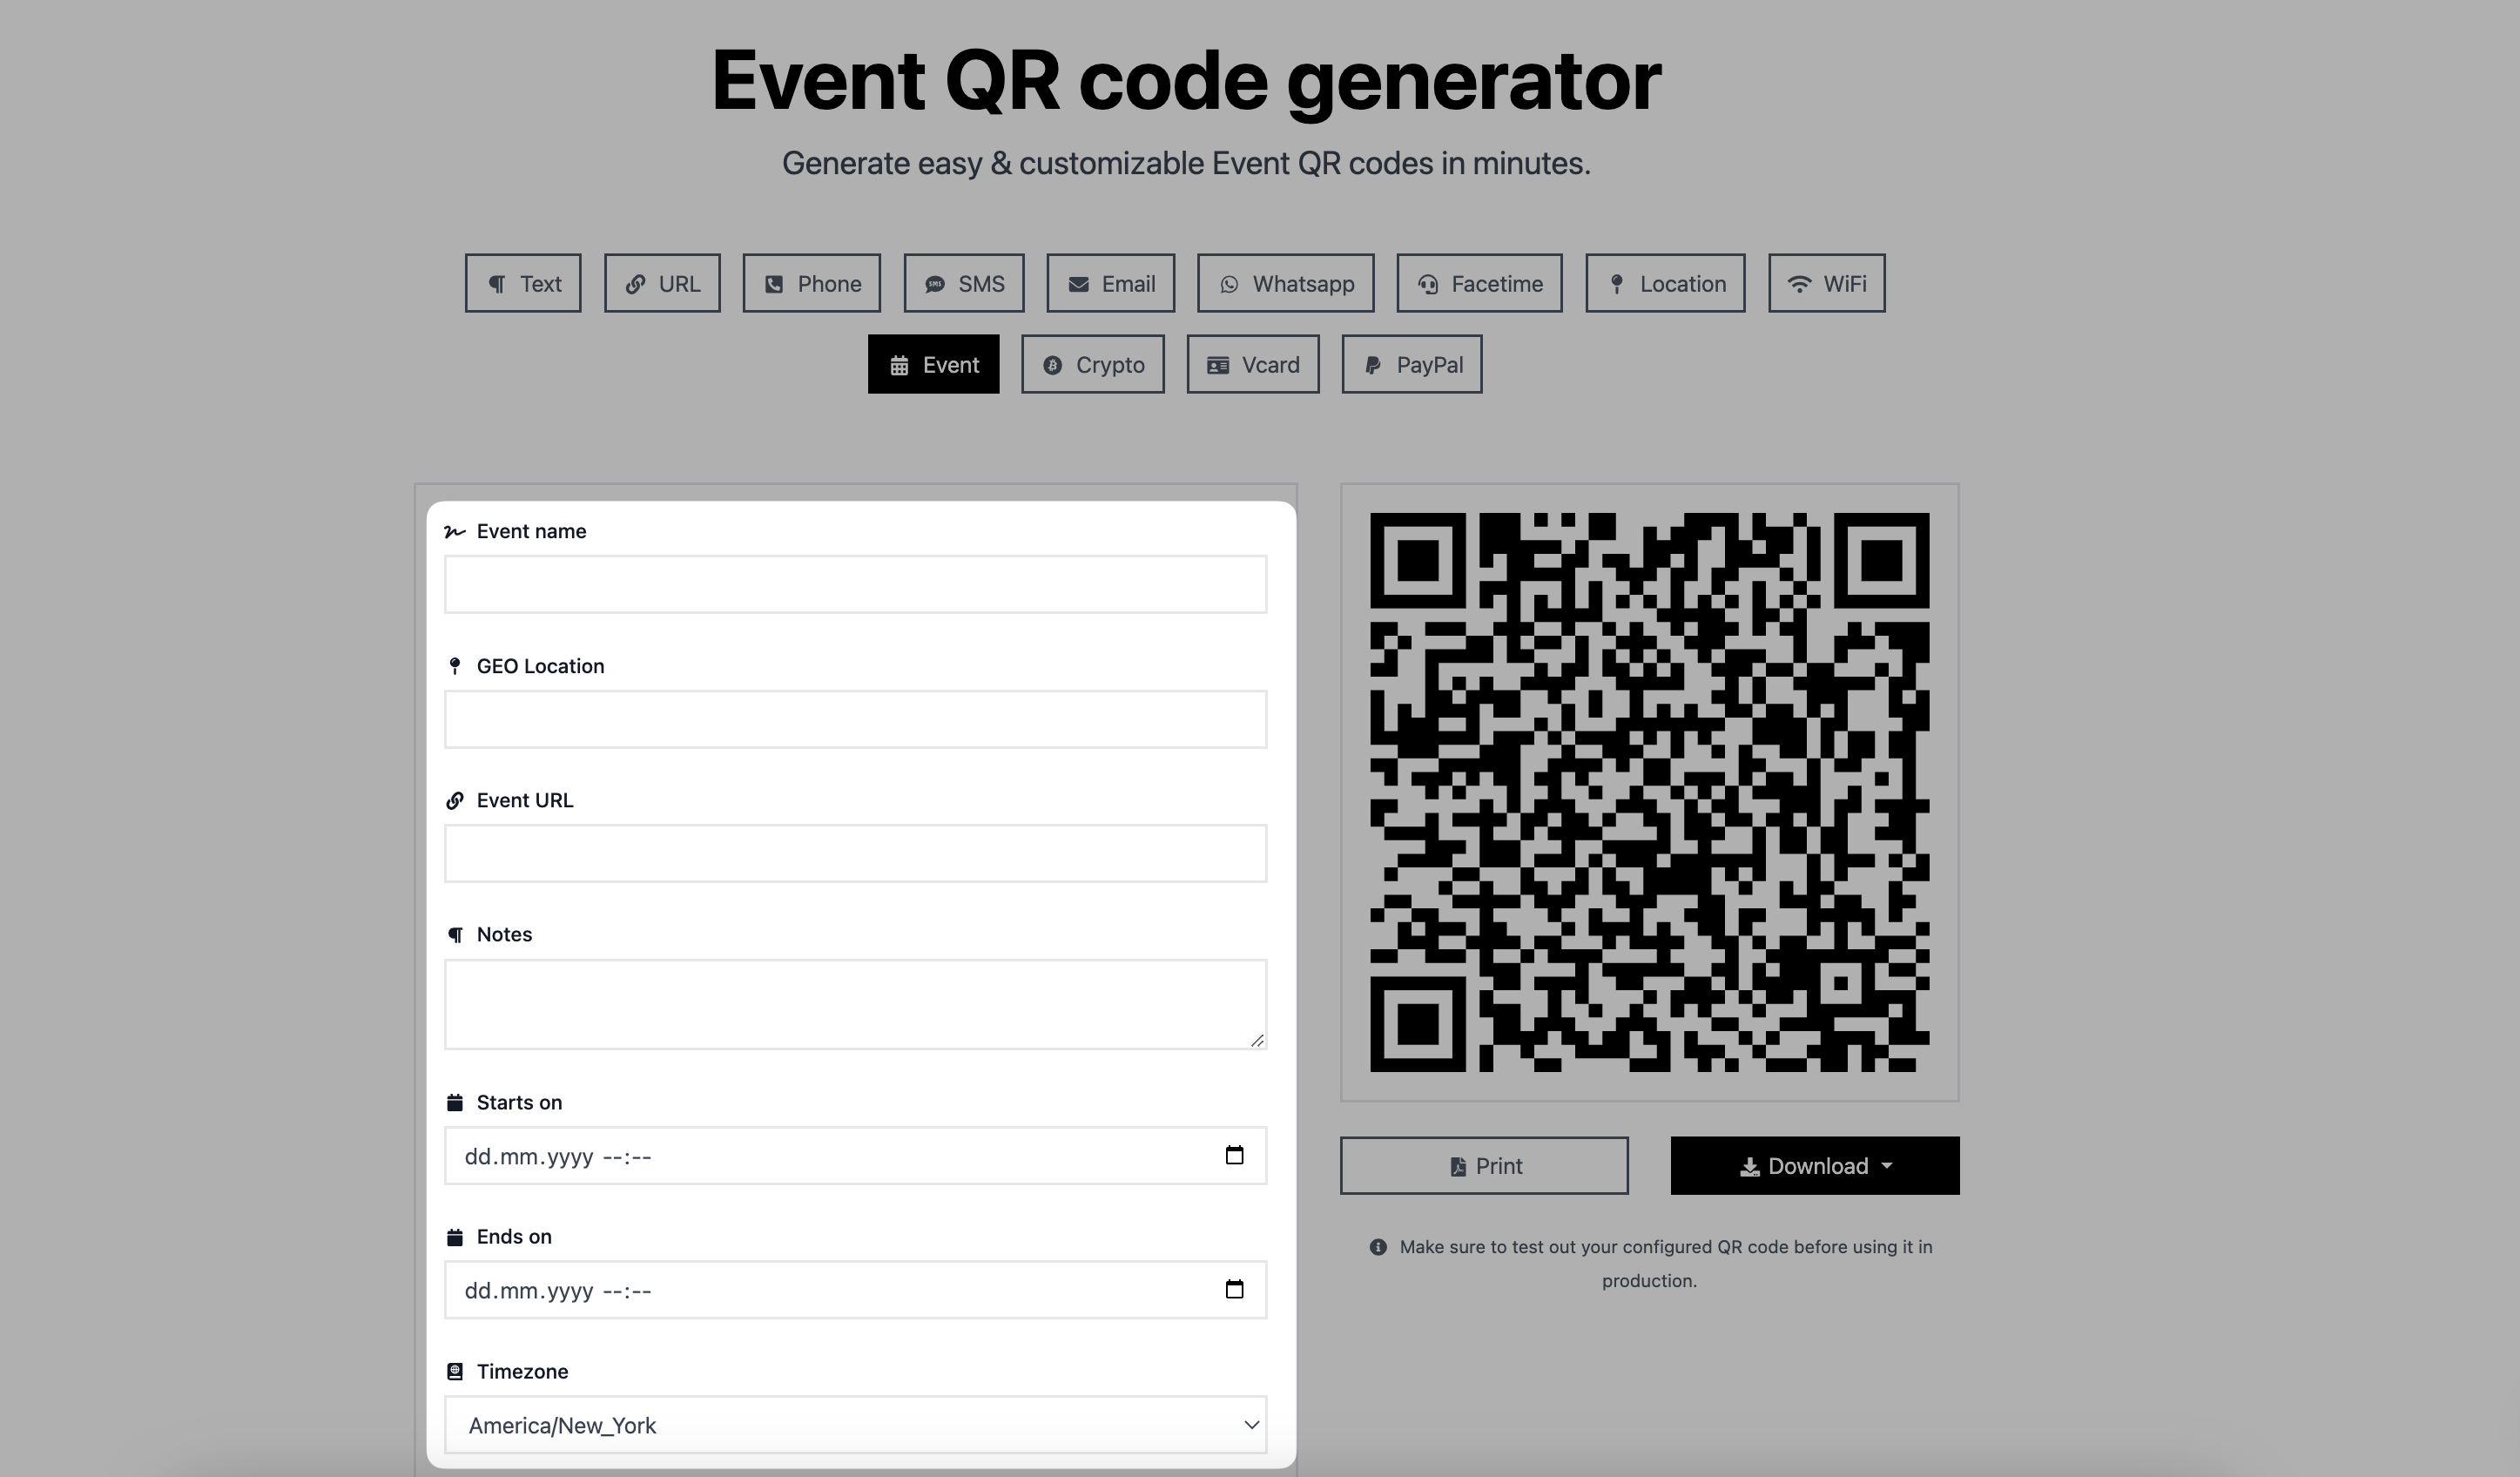 adjusting settings of an event qr code